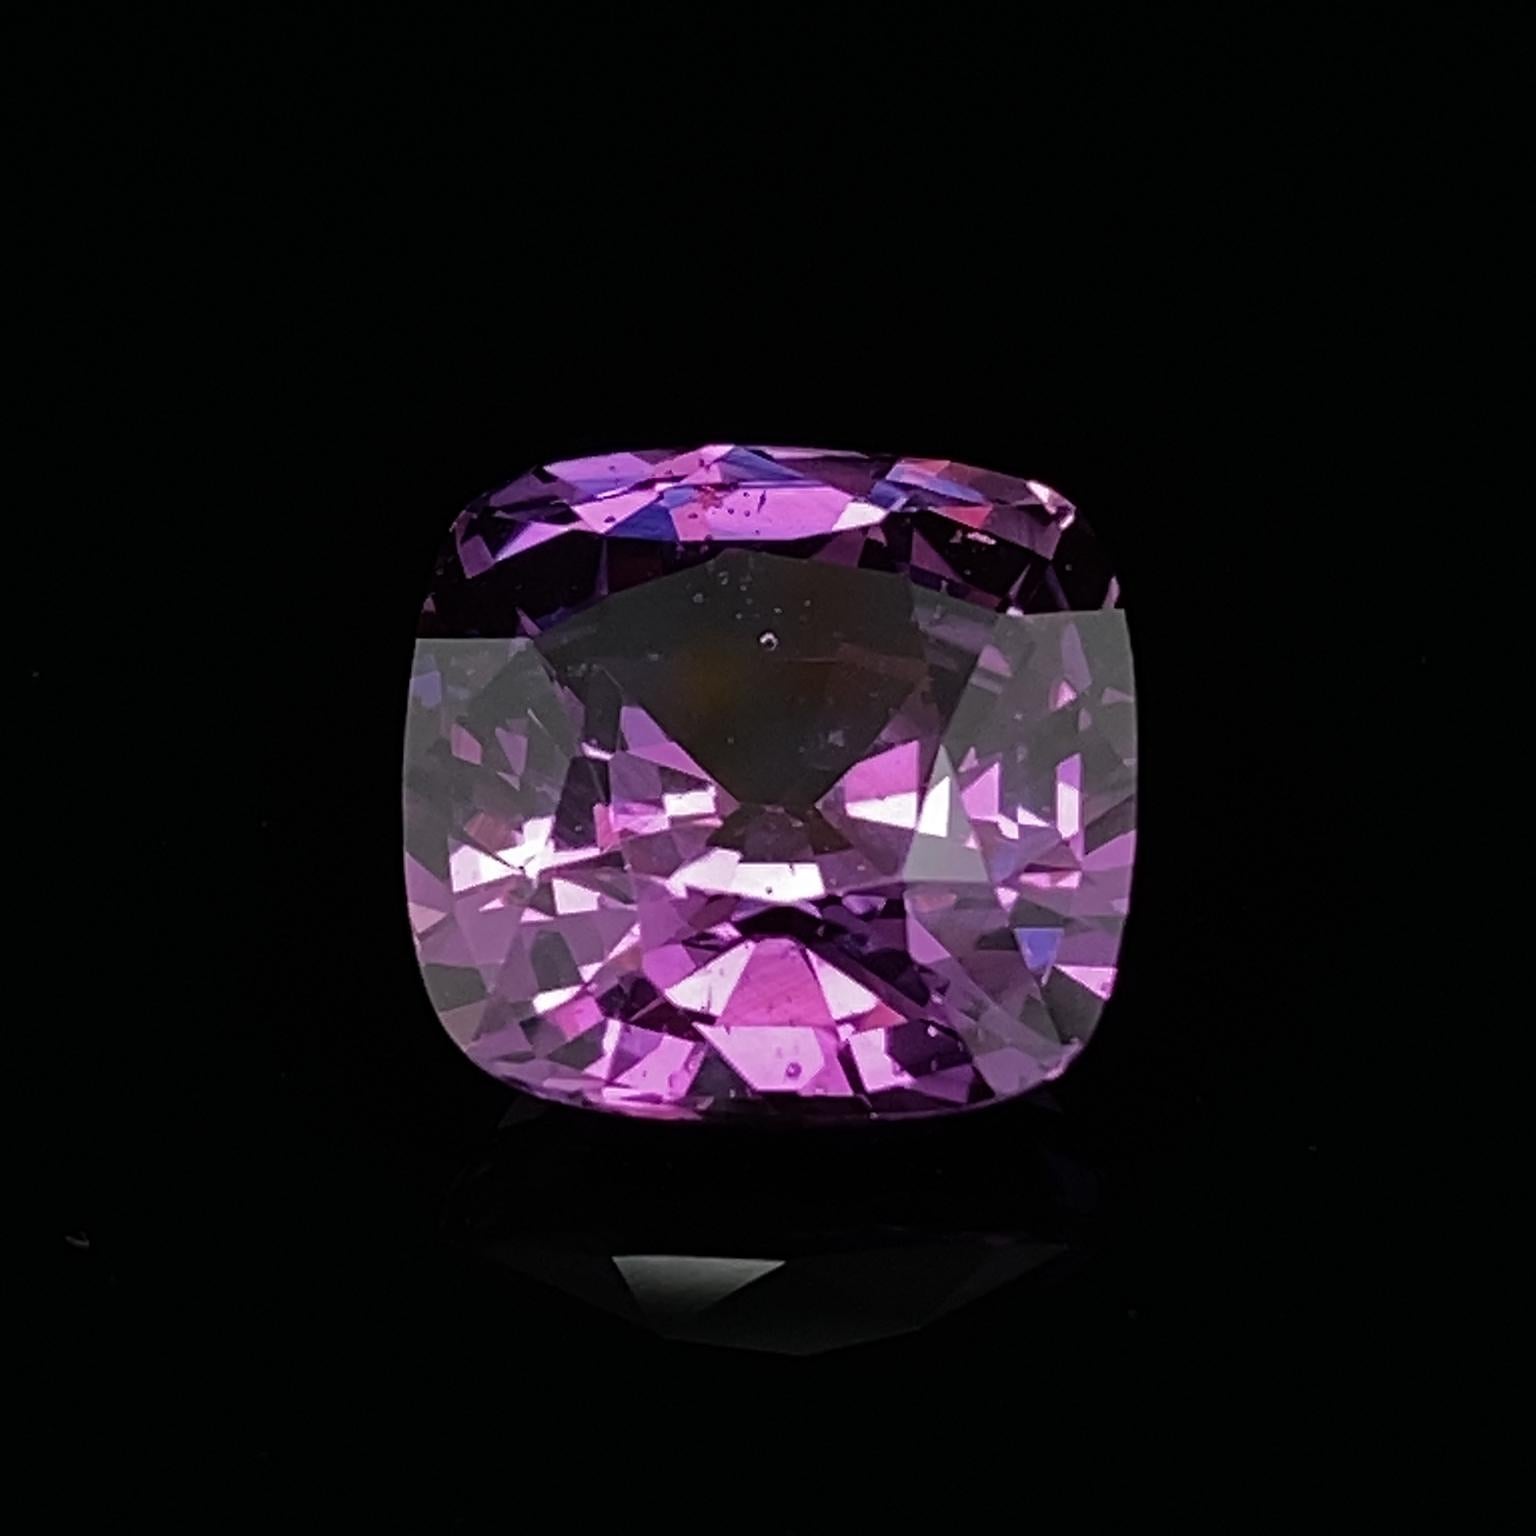 Valentin Magro Cushion Cut Purple Sapphire boasts strong colors. Its hue is reddish purple with medium dark tones underscoring its appearance. The saturation, or intensity, is vivid, making the stone an eye-catching jewel. Clarity characteristics,